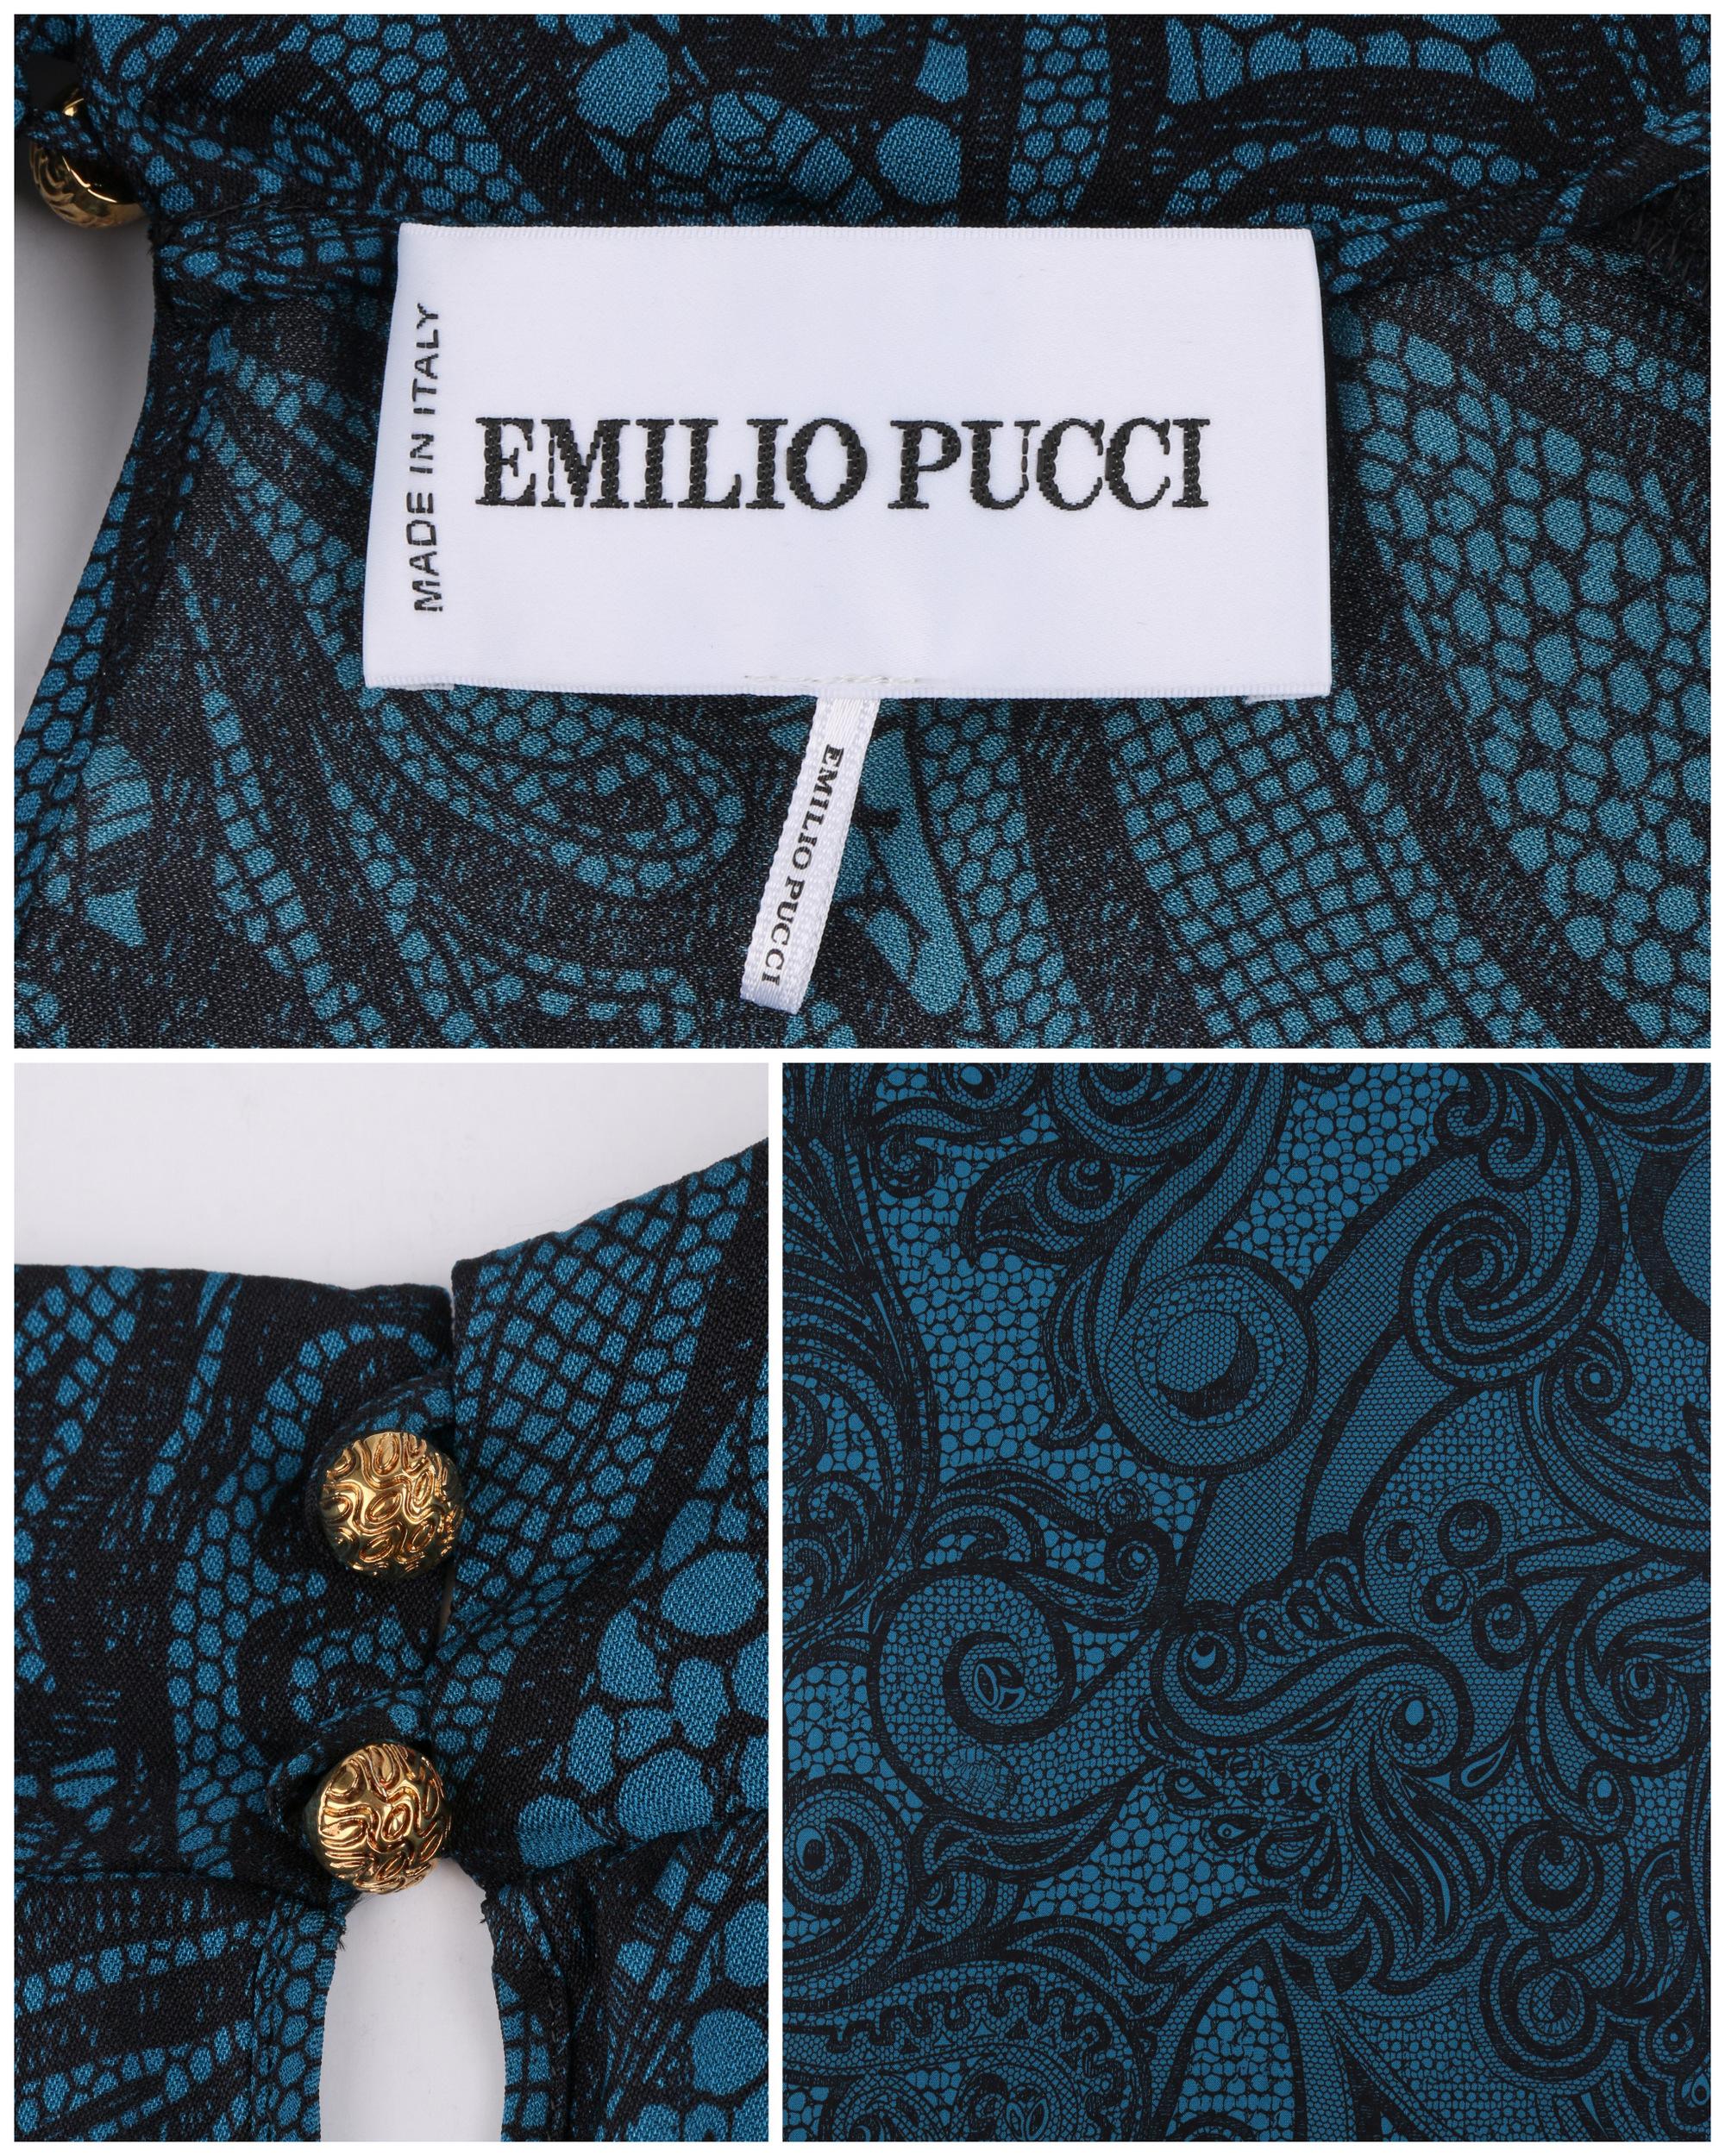 EMILIO PUCCI Teal Black Lace Print Sleeveless Silk Wrap Style Blouse Scarf Belt For Sale 4